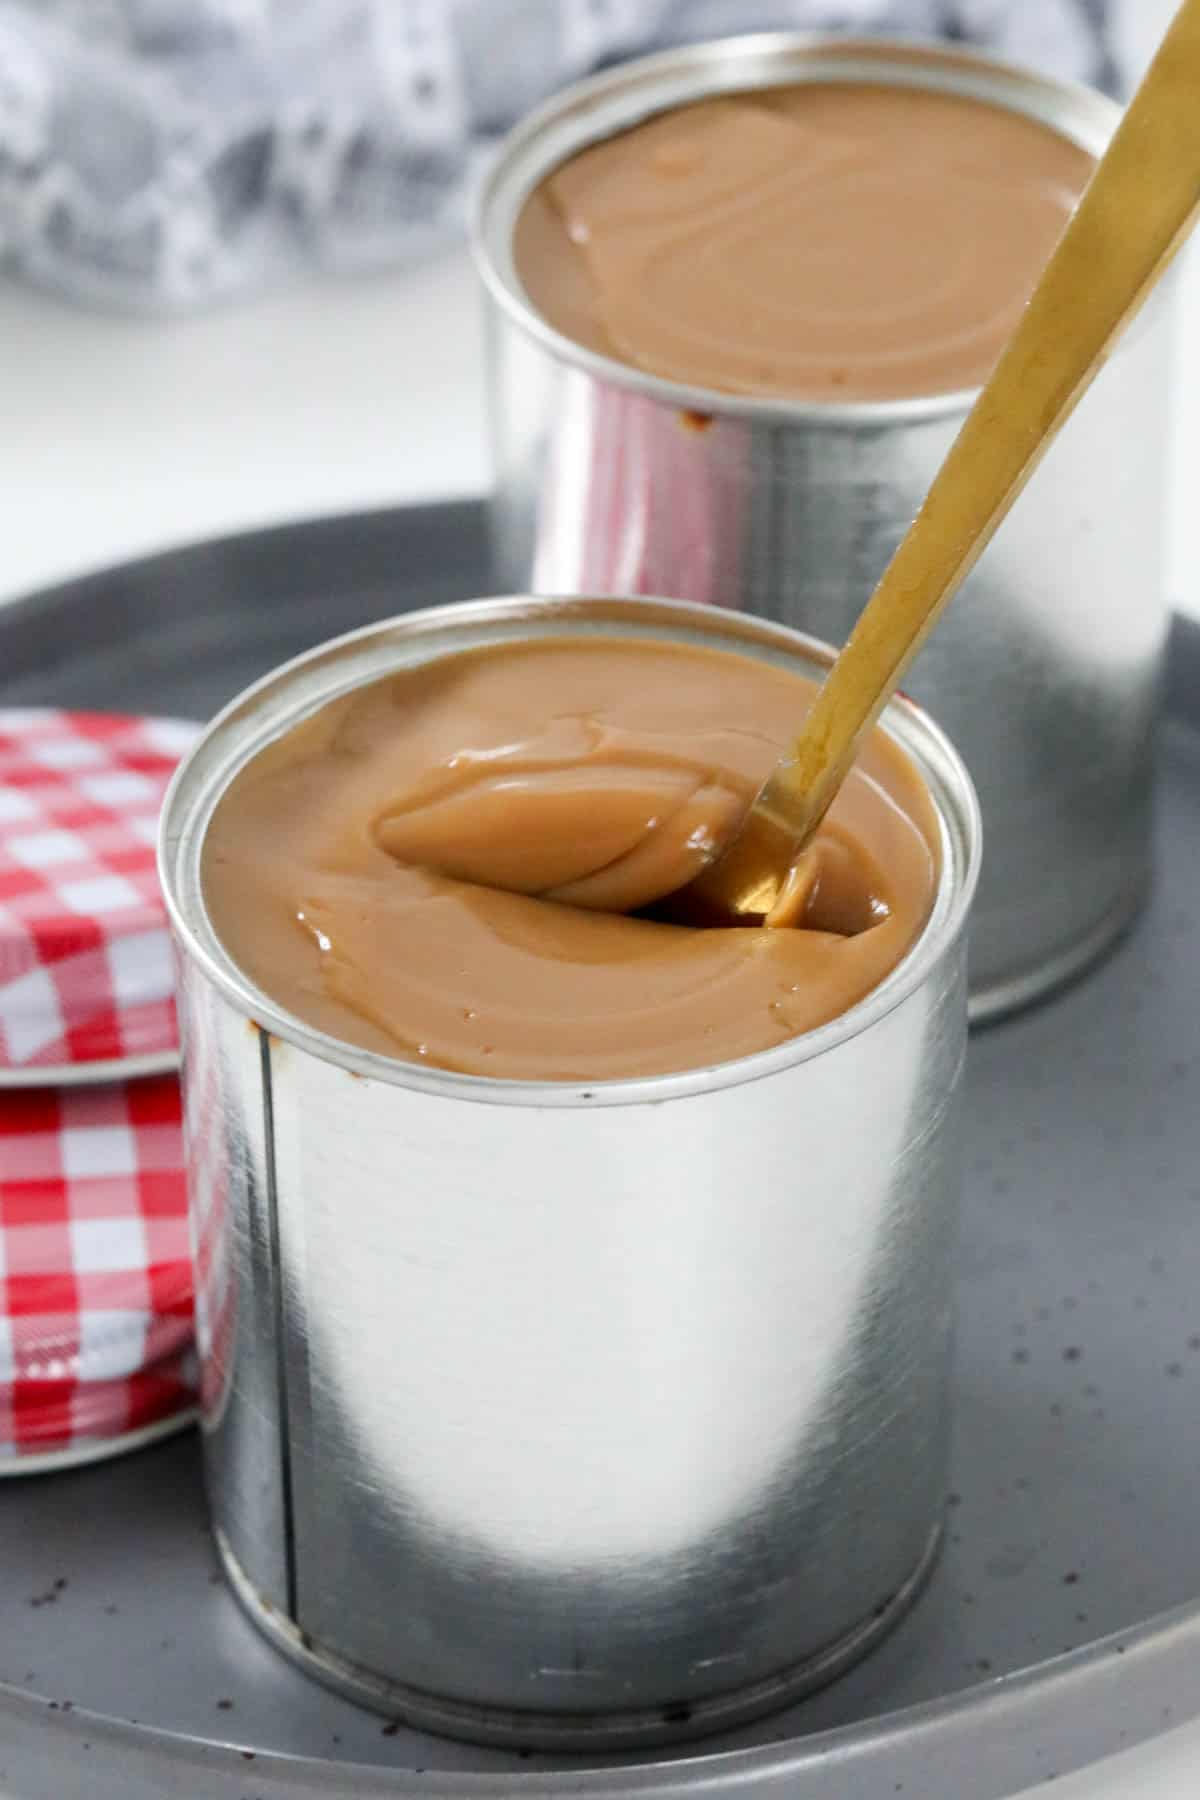 A spoon being dipped into a tin of thick caramel.